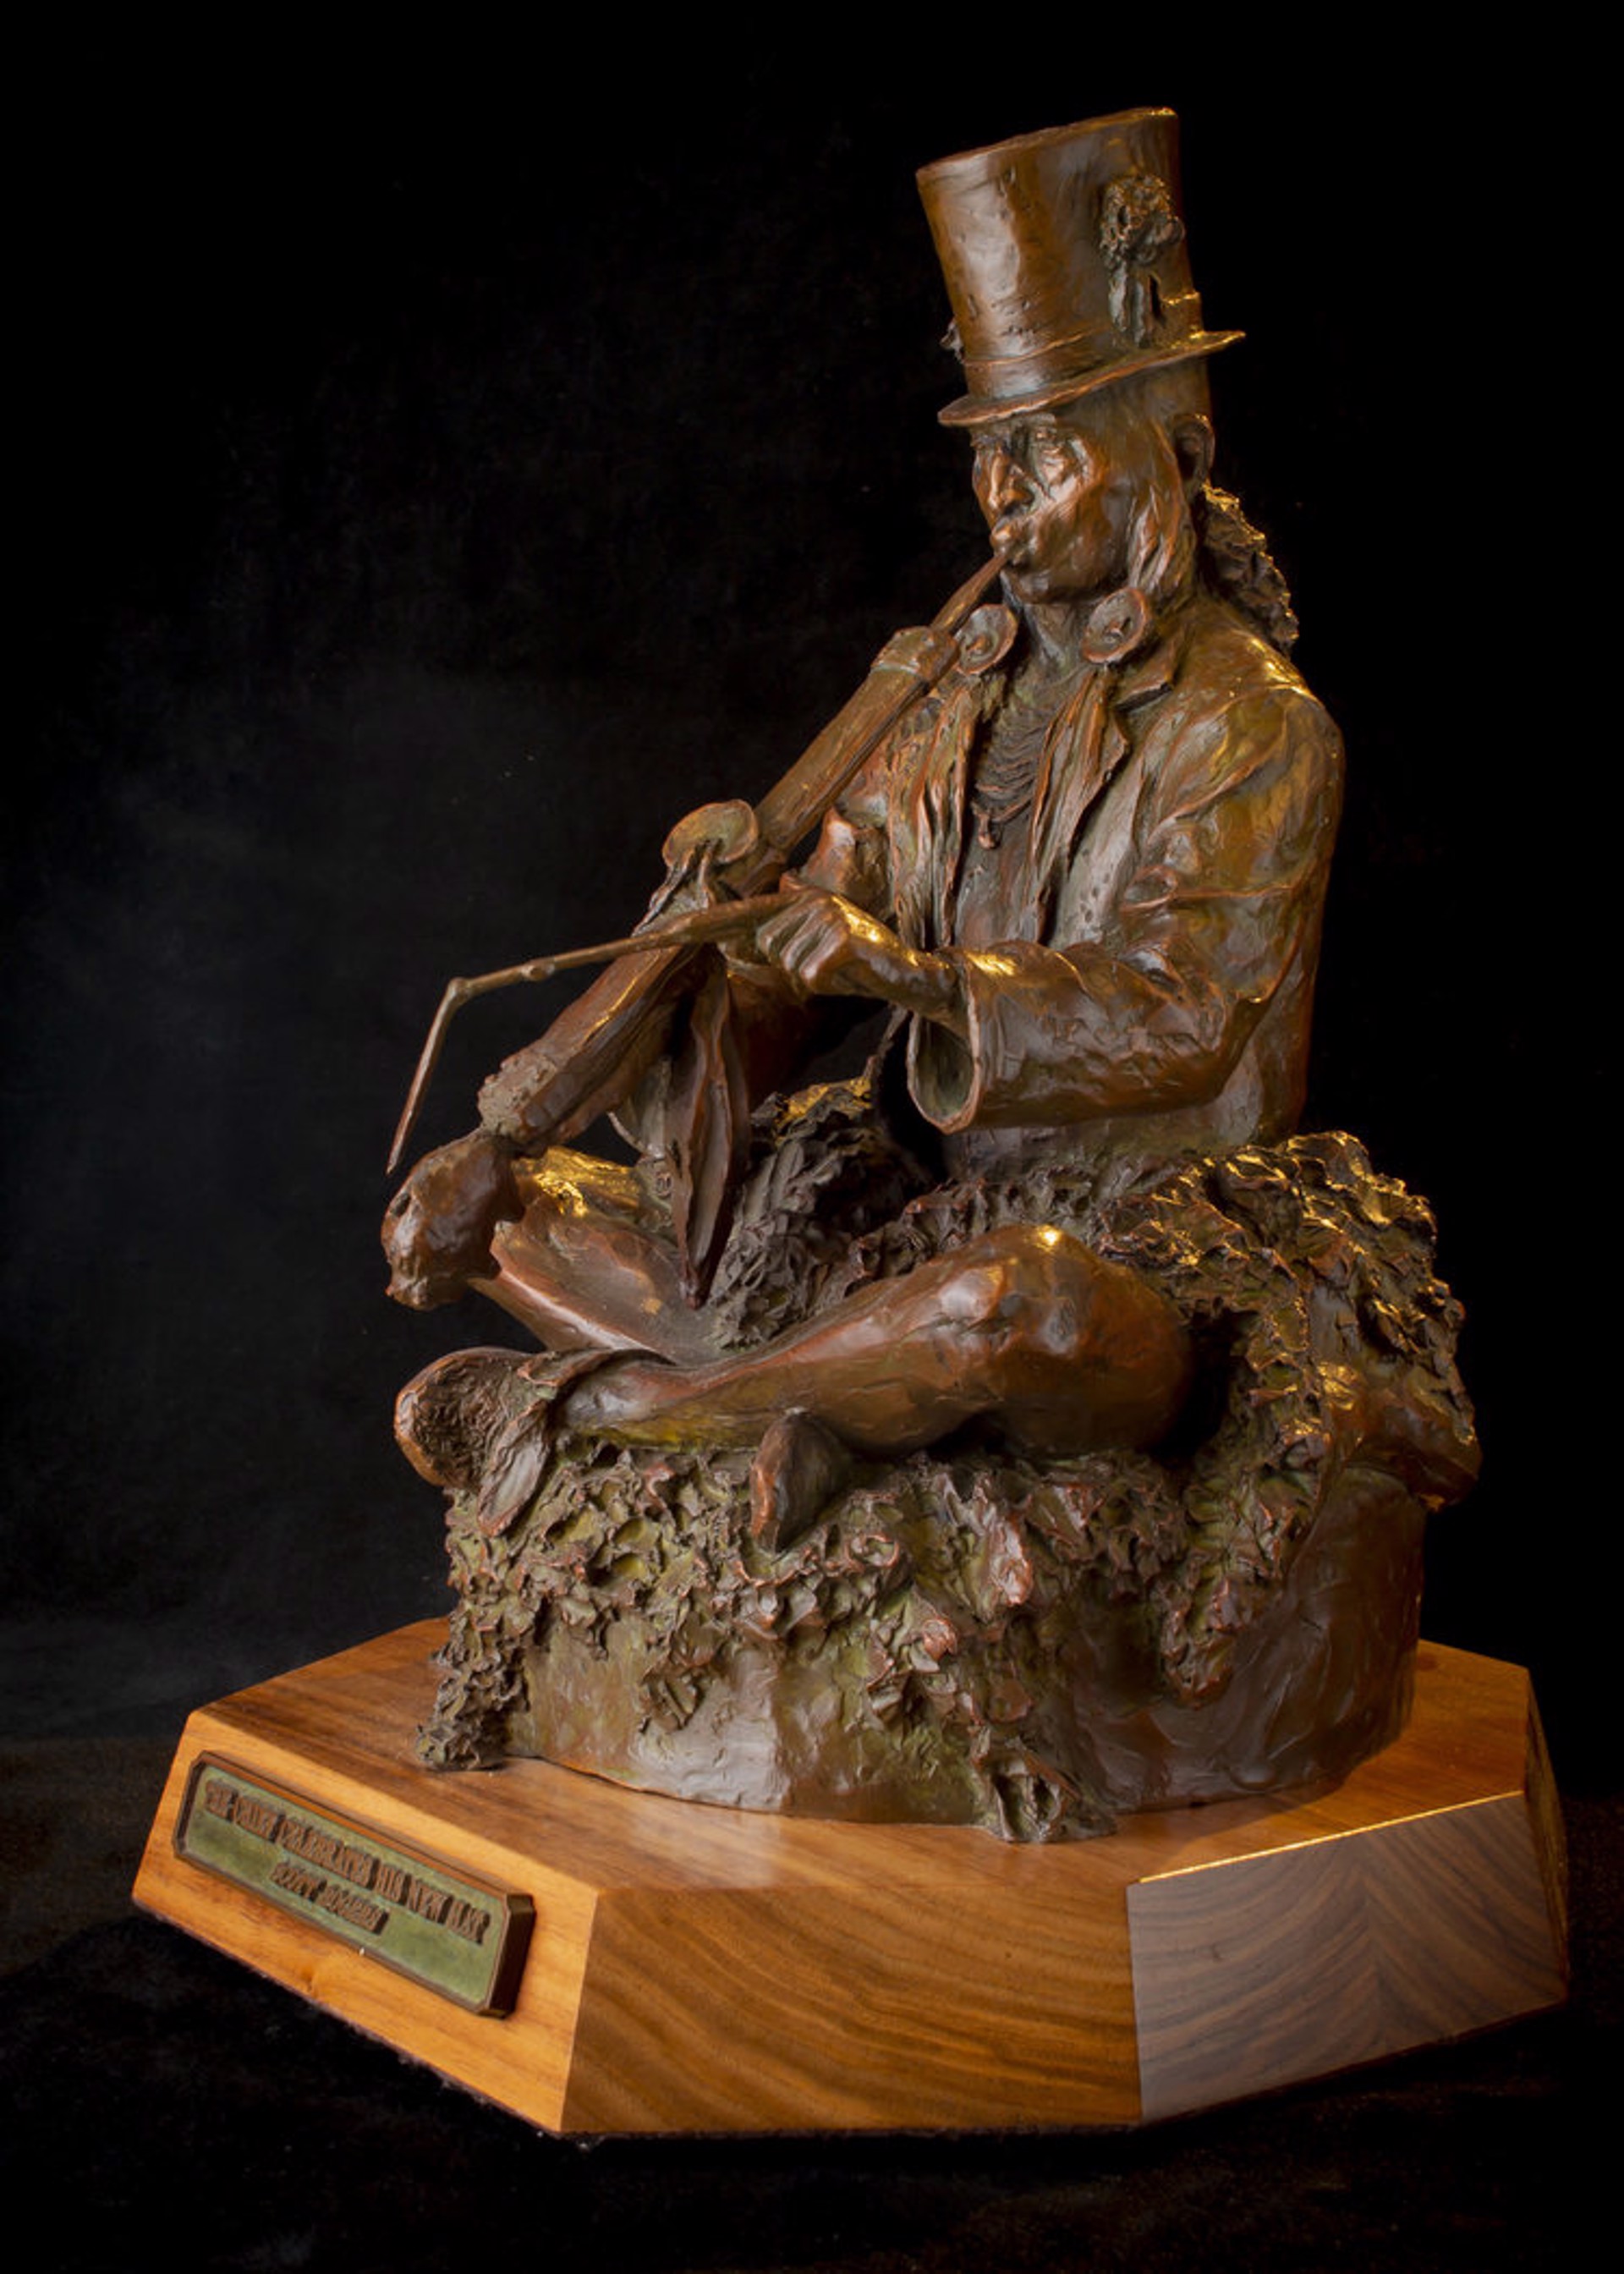 The Chief Celebrates His Hat (Maquette) by Scott Rogers